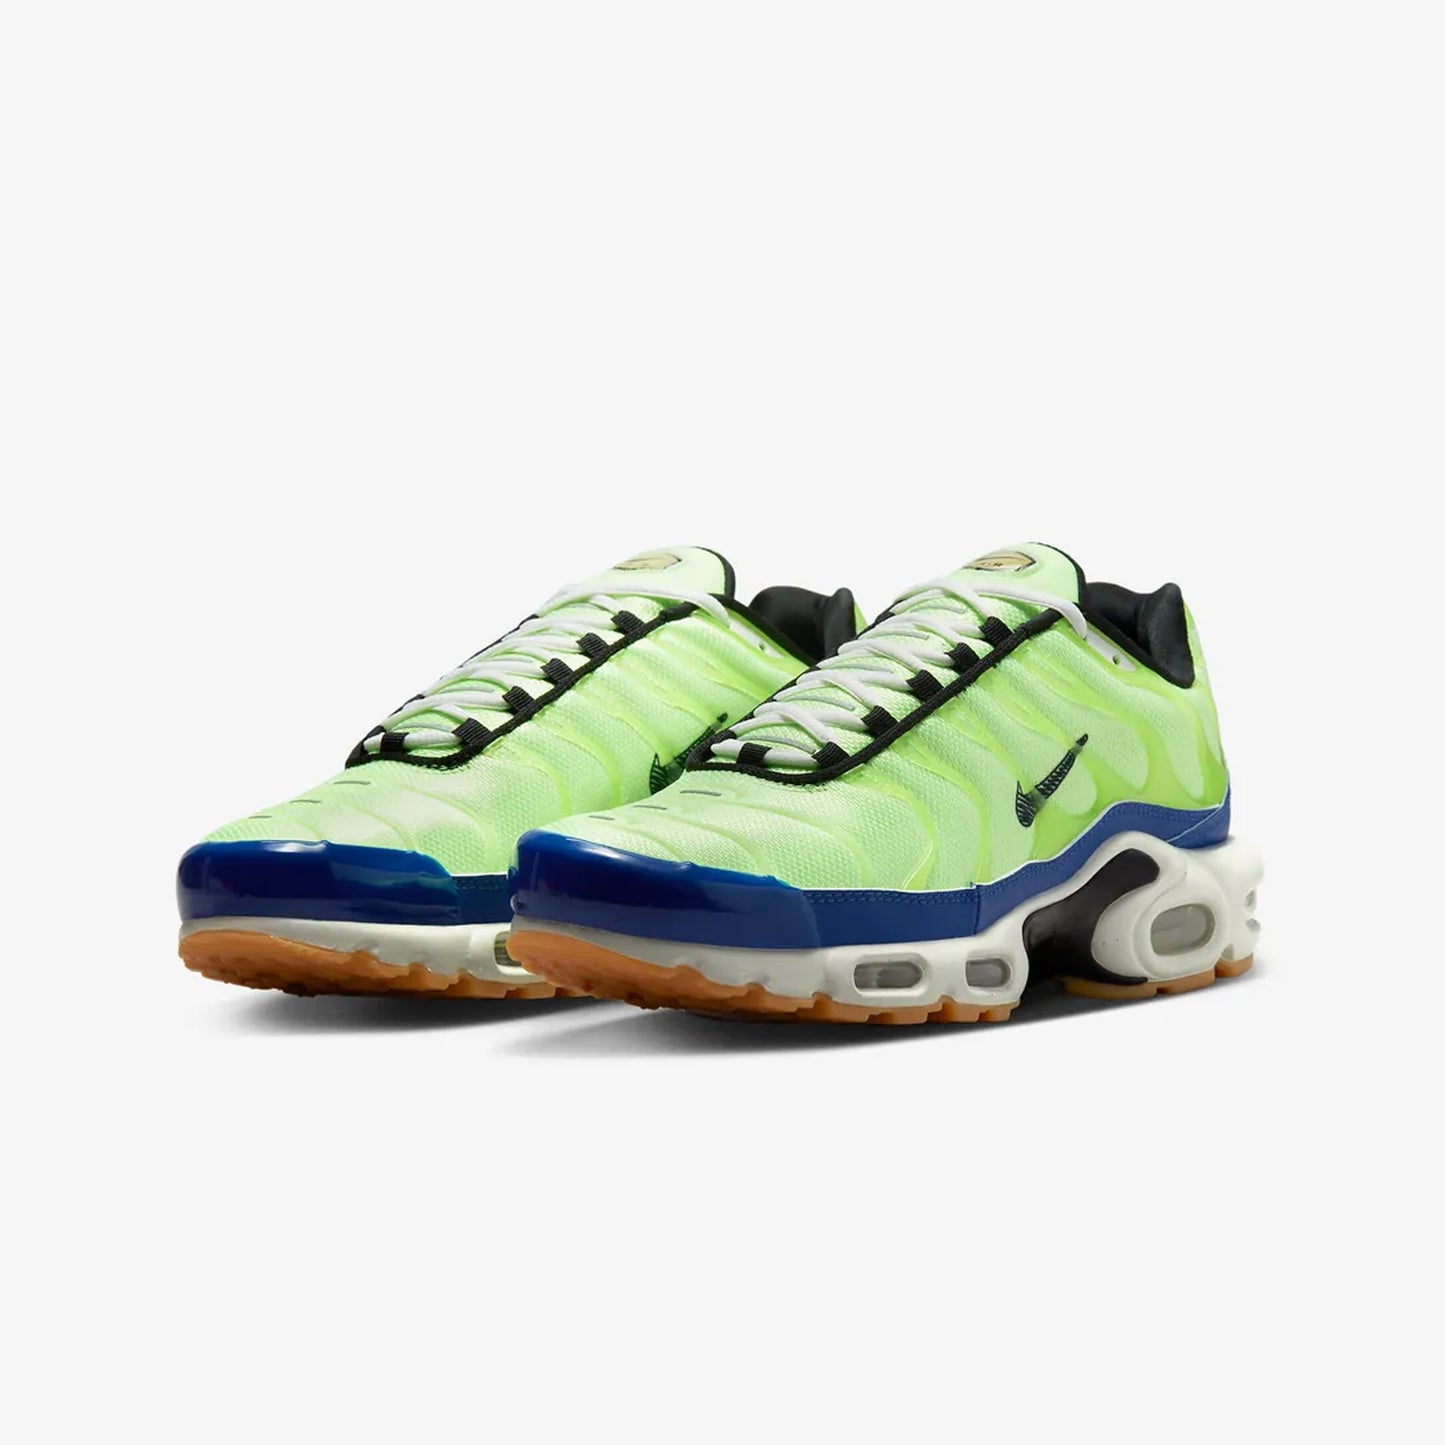 AIR MAX PLUS SE 'GHOST GREEN/BLACK-OLD ROYAL-SUMMIT WHITE'